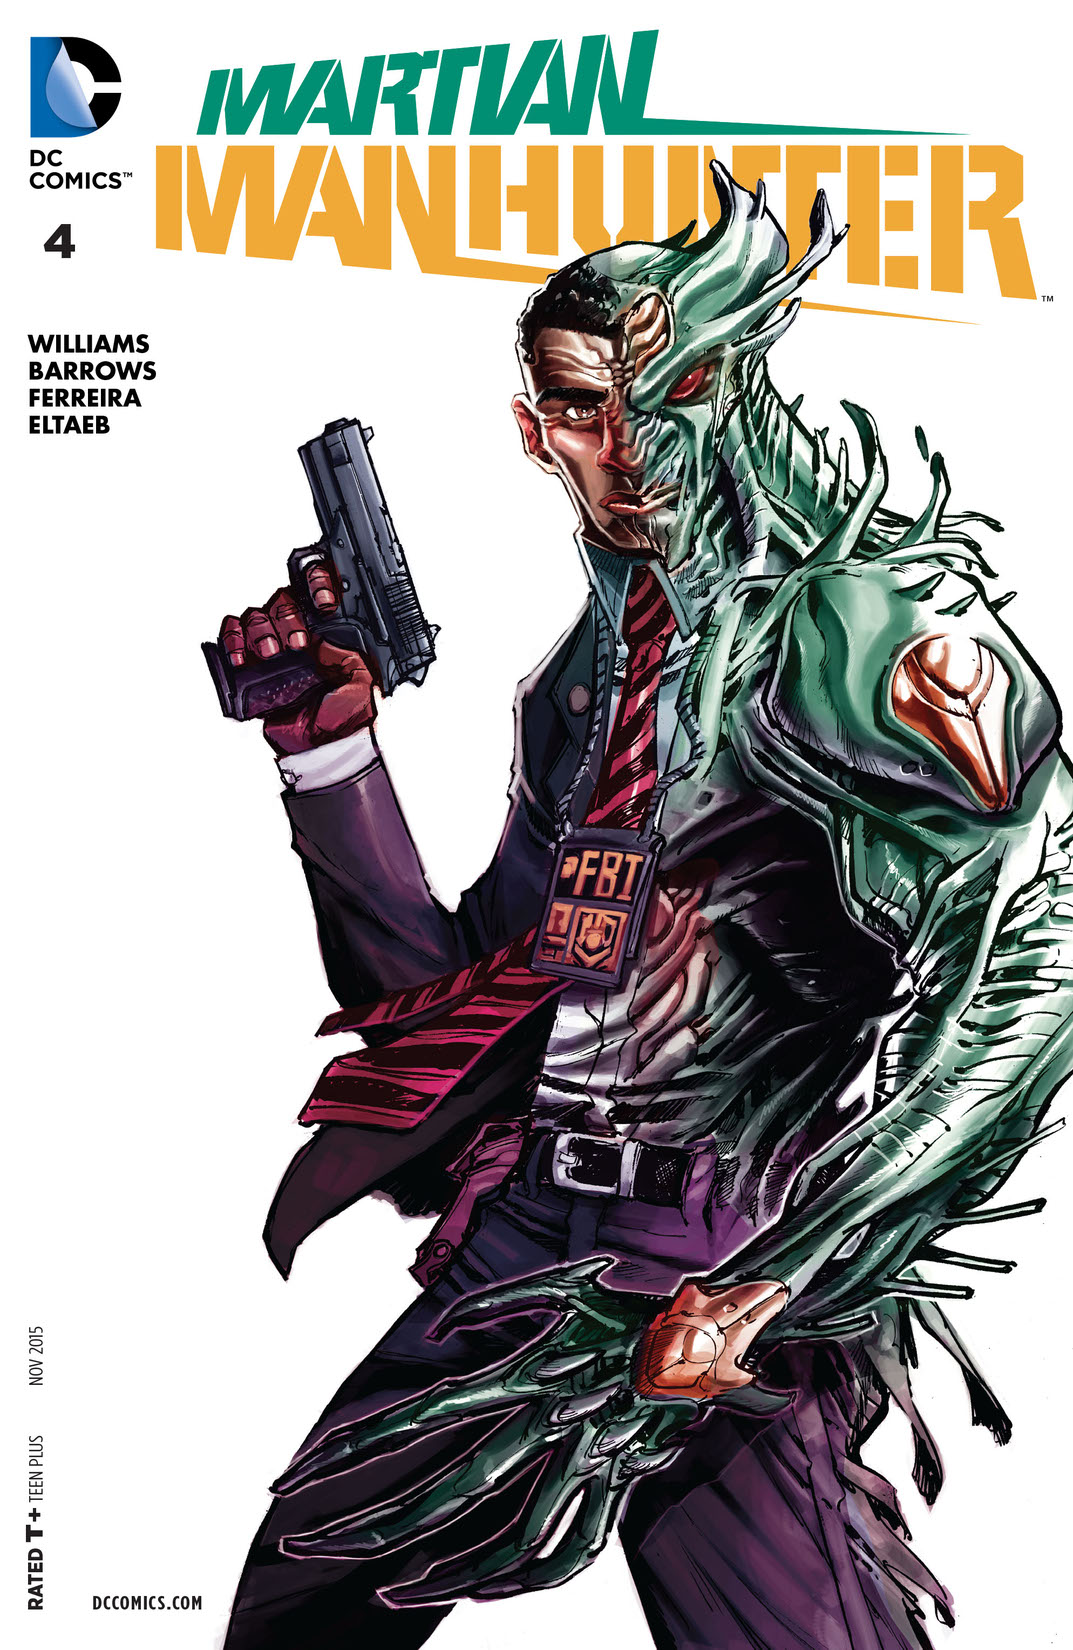 Martian Manhunter (2015-) #4 preview images